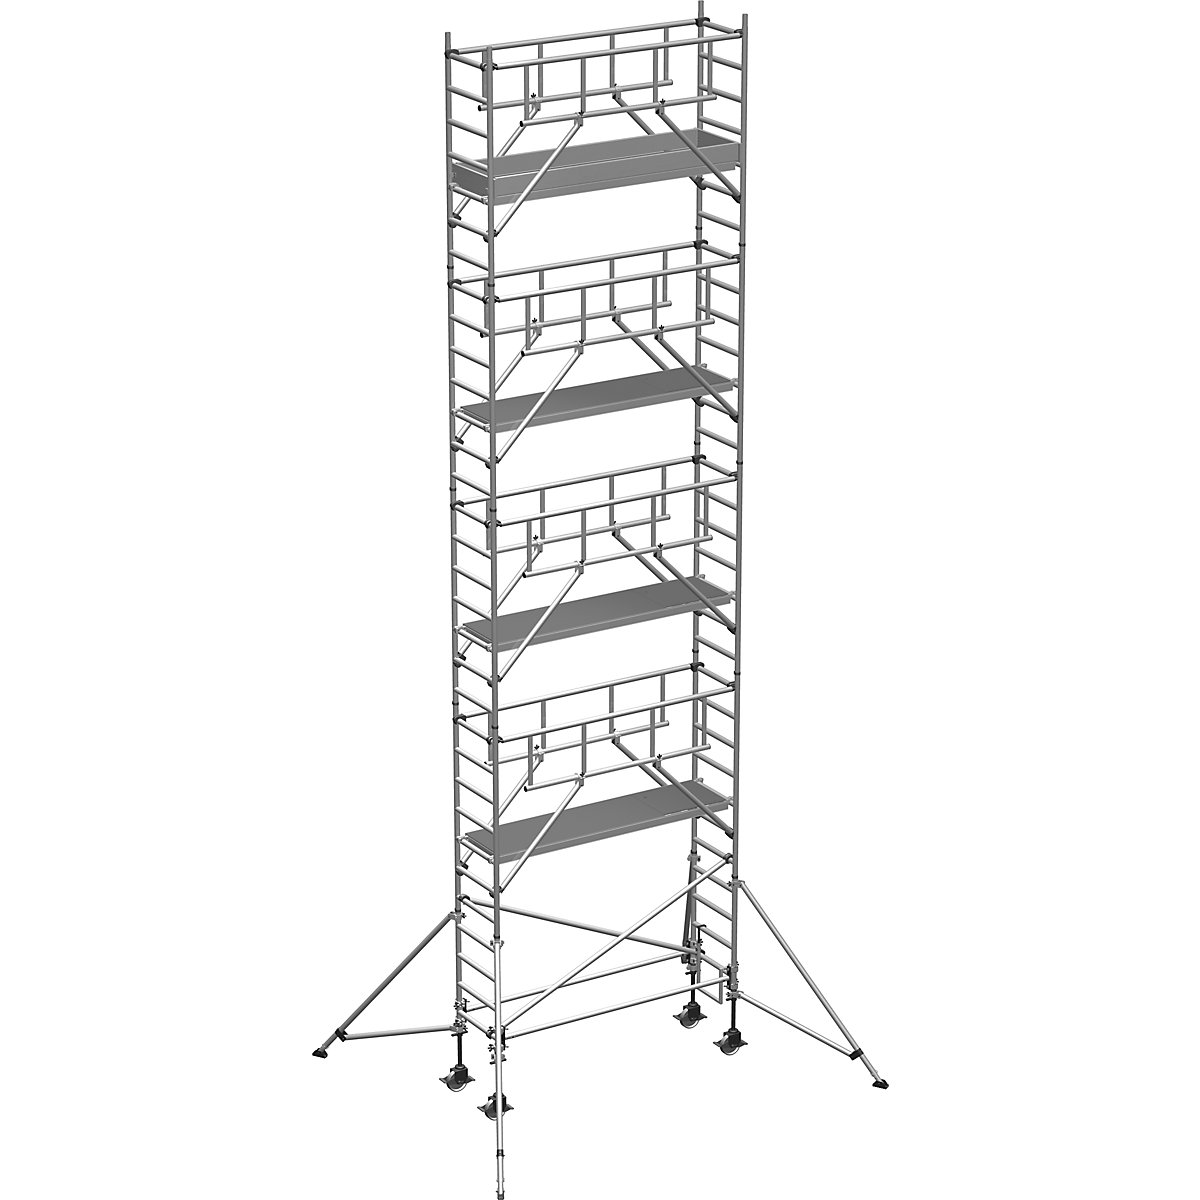 S-PLUS mobile access tower – ZARGES, platform 1.80 x 0.60 m, working height 10.40 m-2